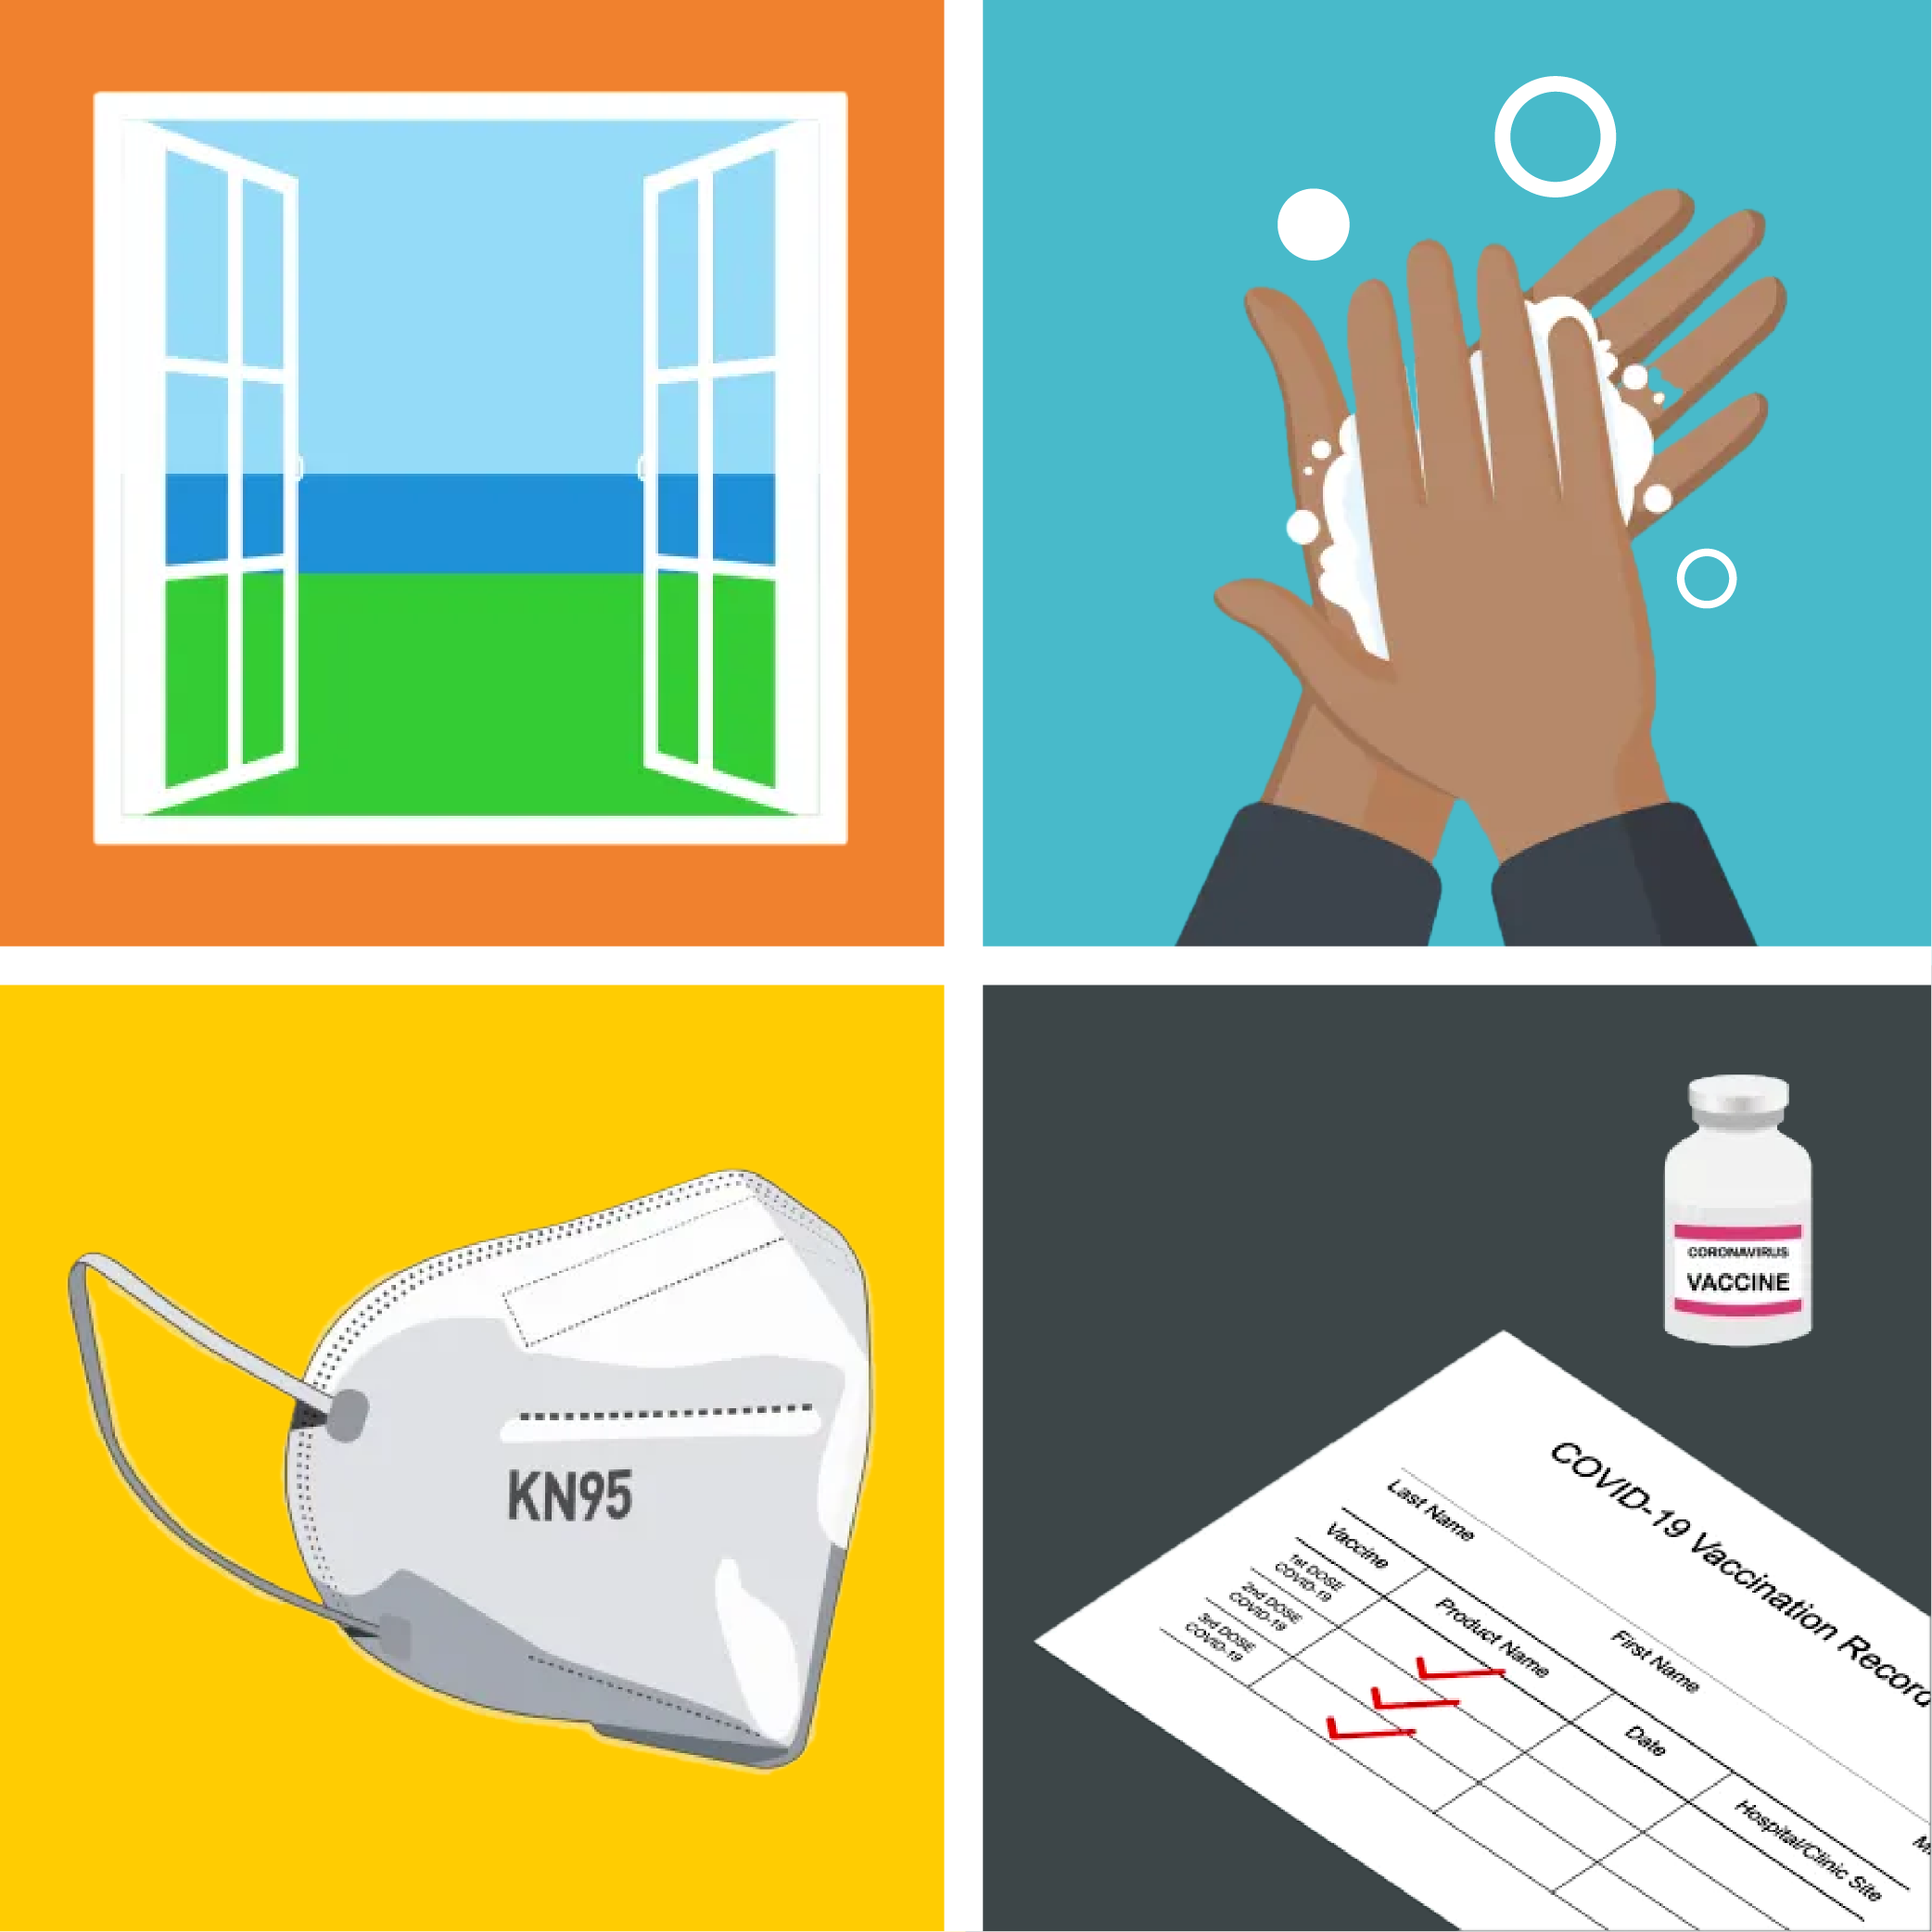 4 images showing types of protection against the spread of respiratory diseases including COVID-19, influenza, colds, etc. including increasing ventilation, washing hands, wearing masks and getting vaccinated.